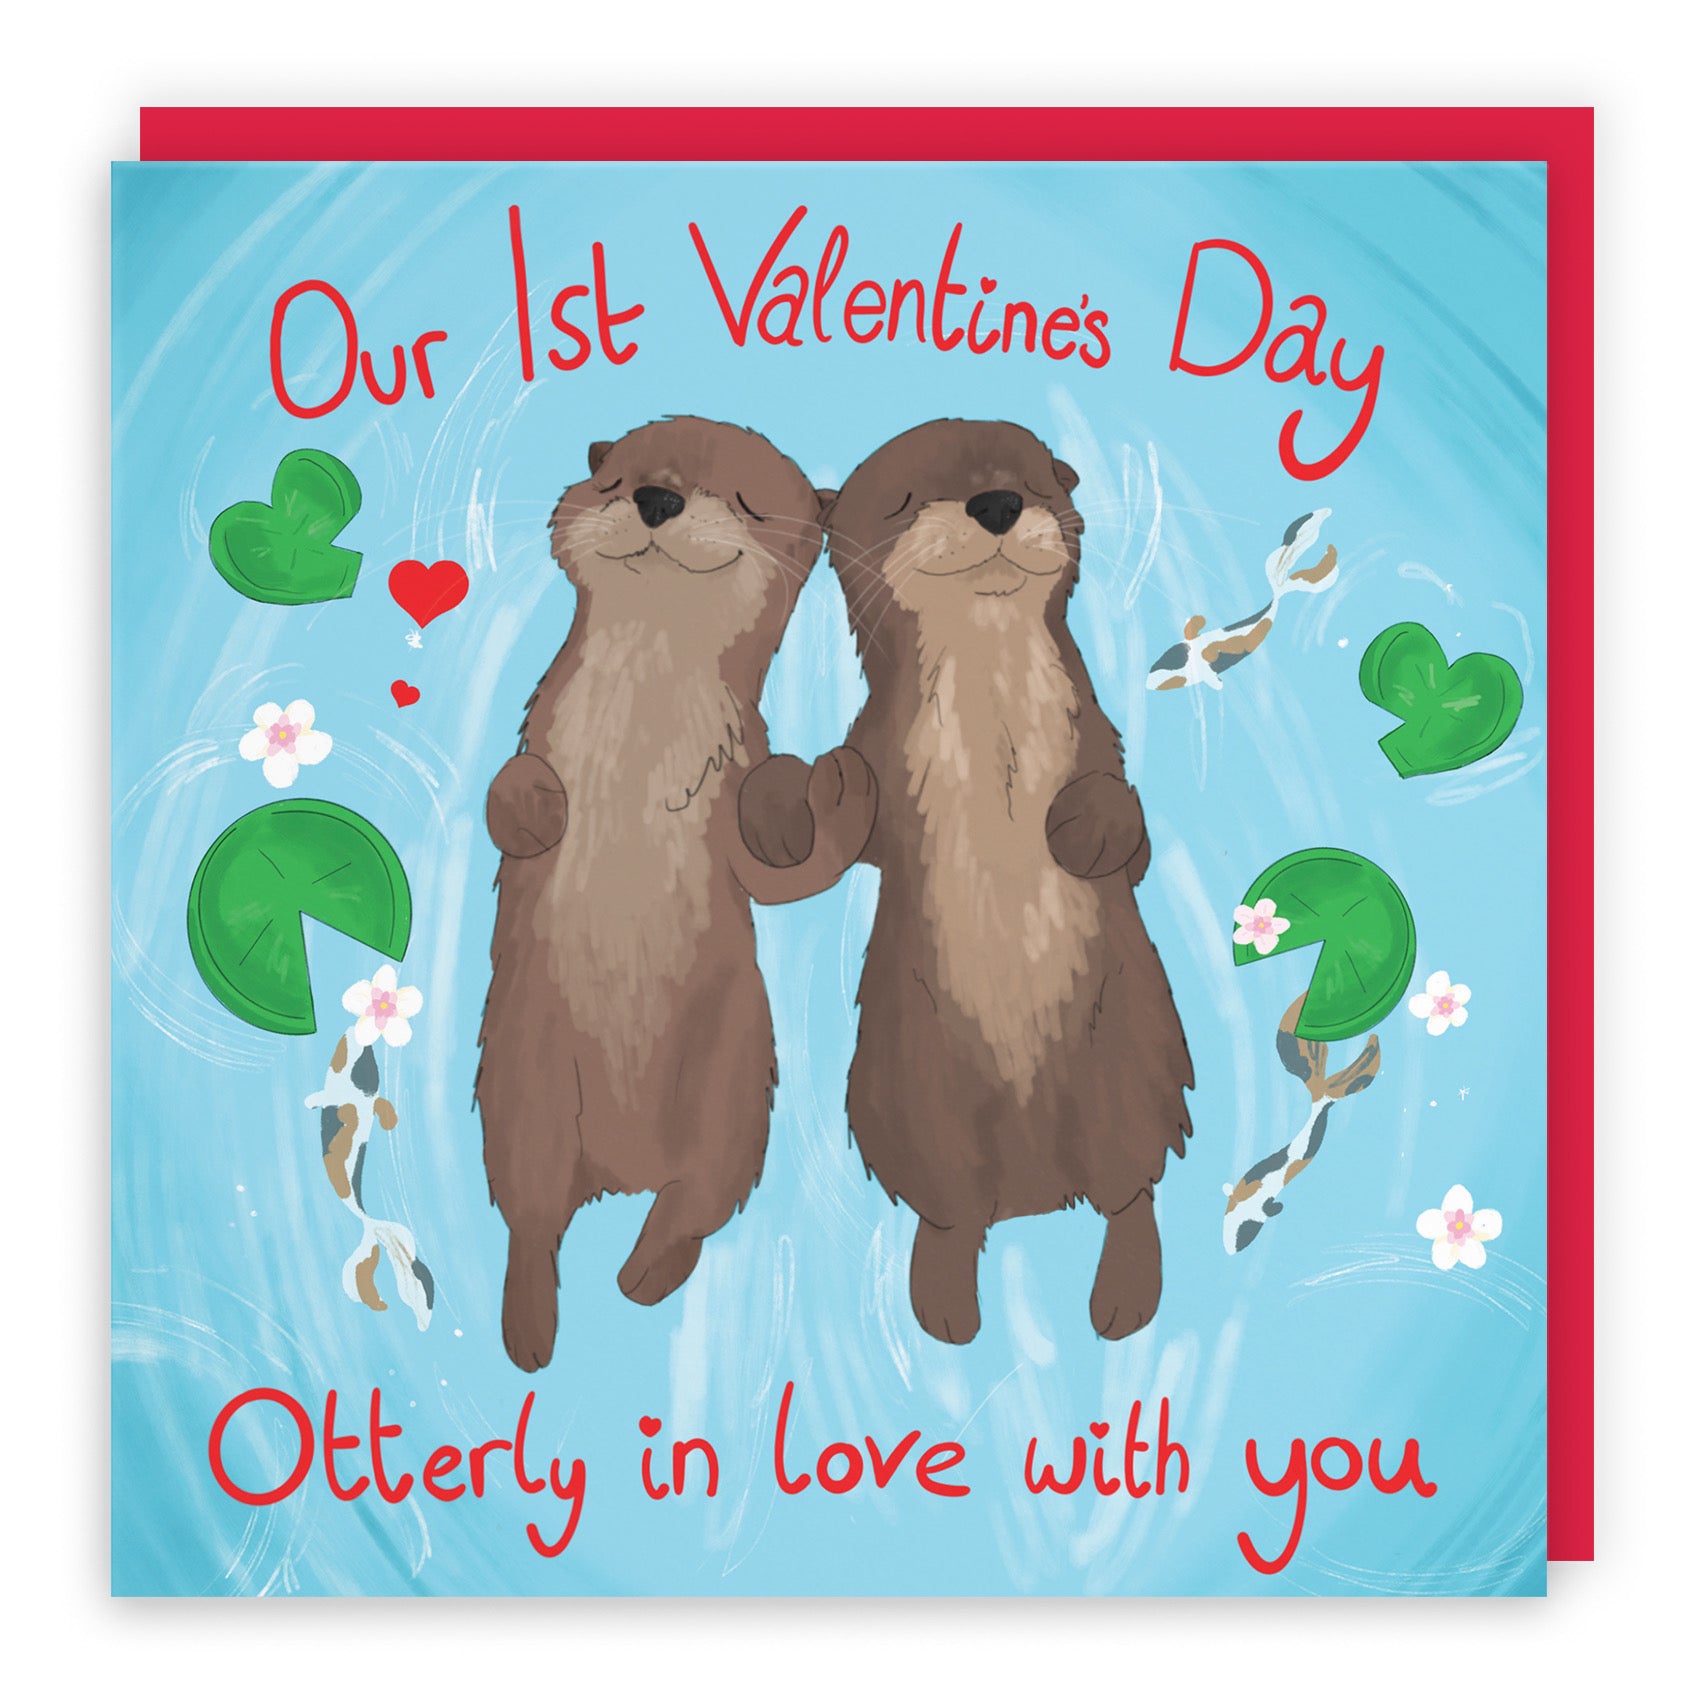 Otters 1st Valentine's Day Card Cute Animals - Default Title (B09R6K2YHV)